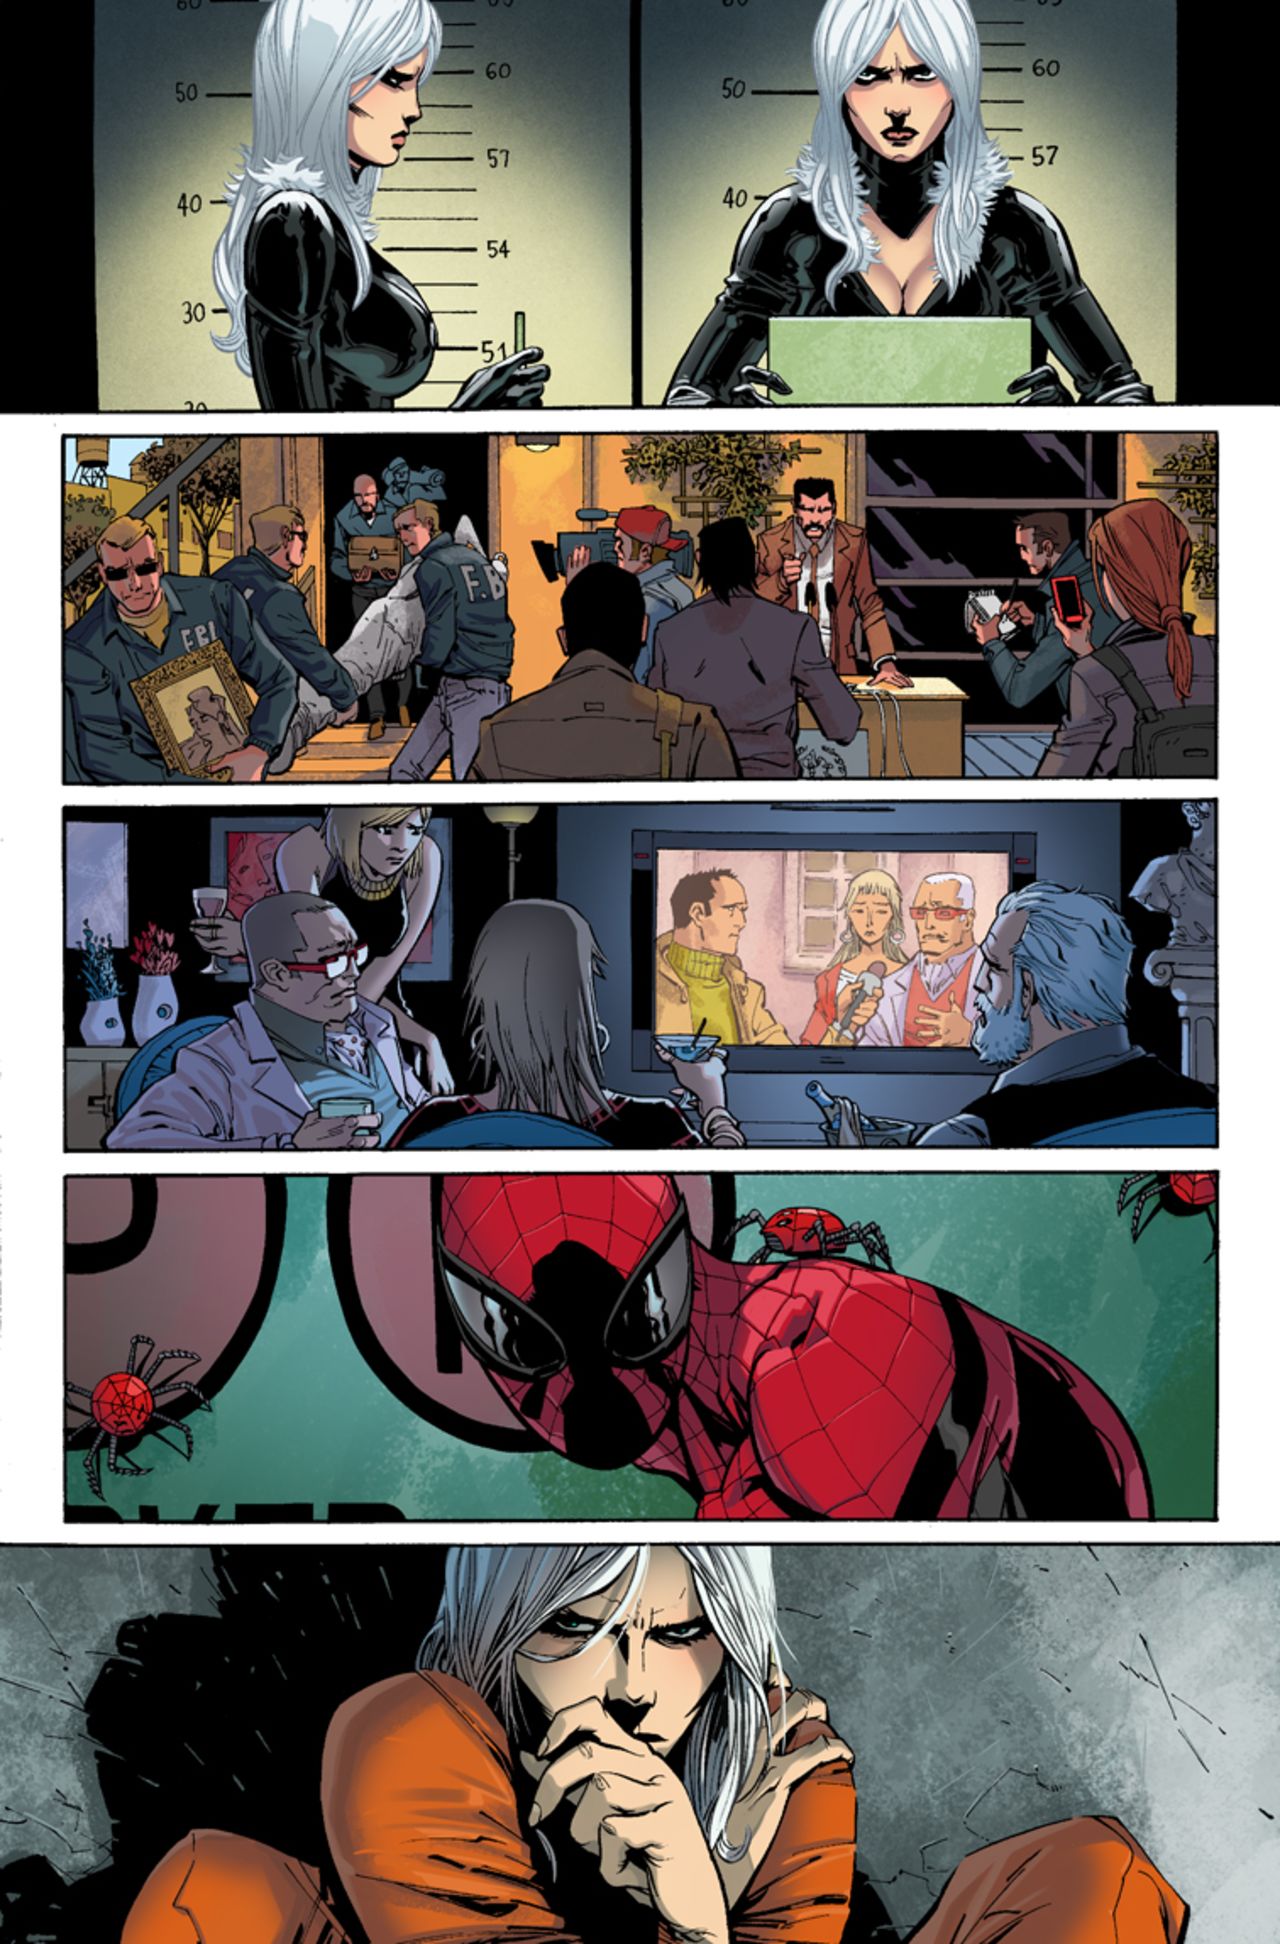 More detail from "Amazing Spider-Man" #1.